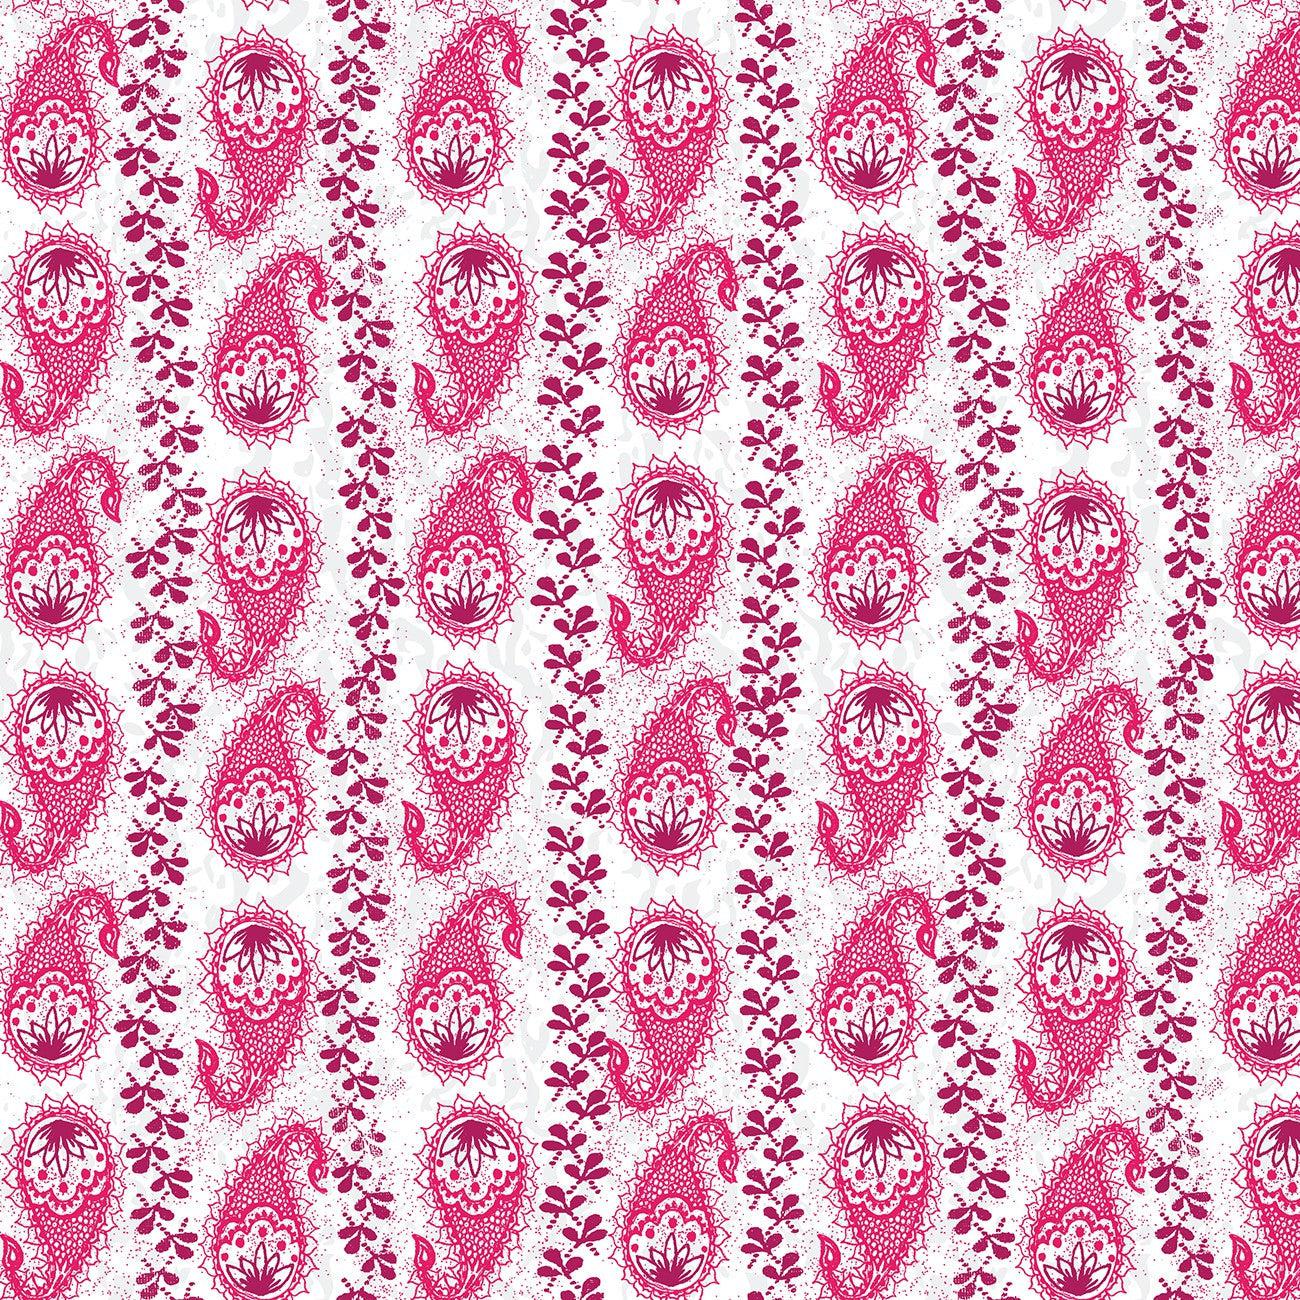 Our House Magenta Paisley Stripe Fabric